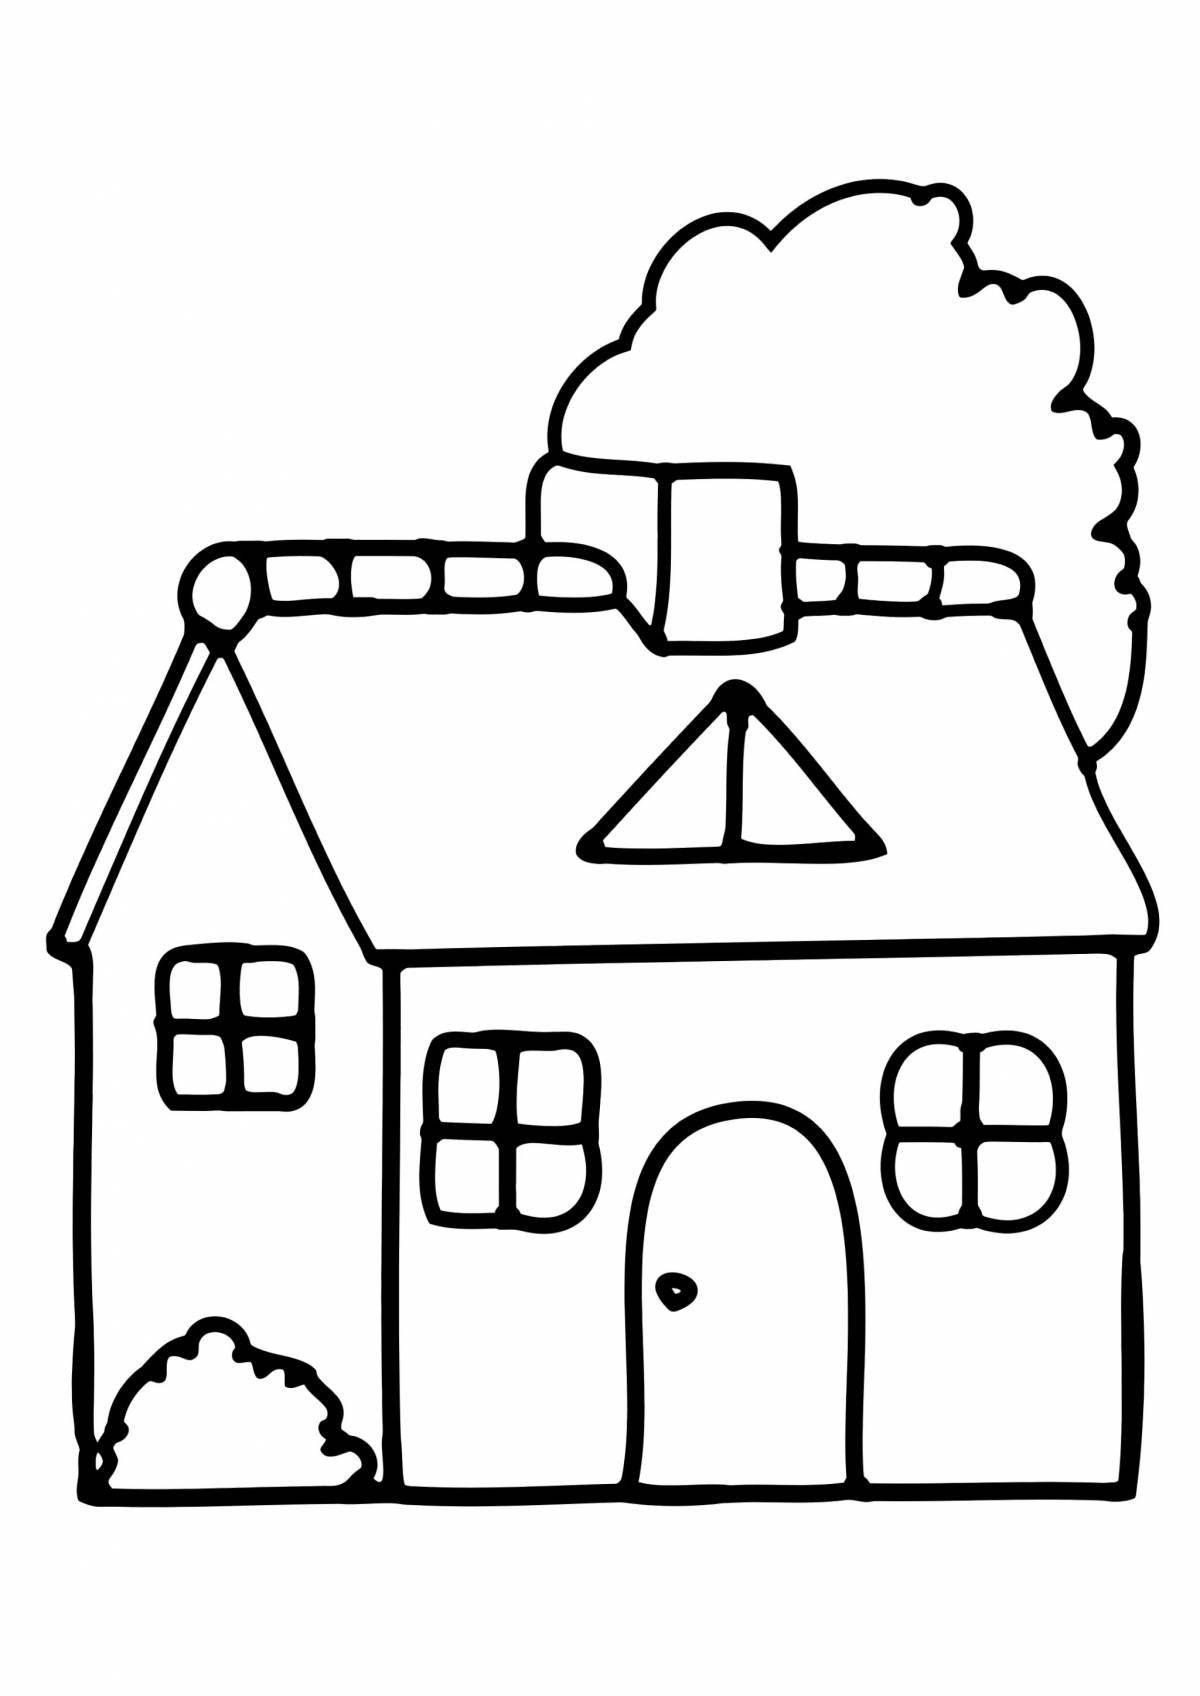 Amazing houses coloring pages for boys